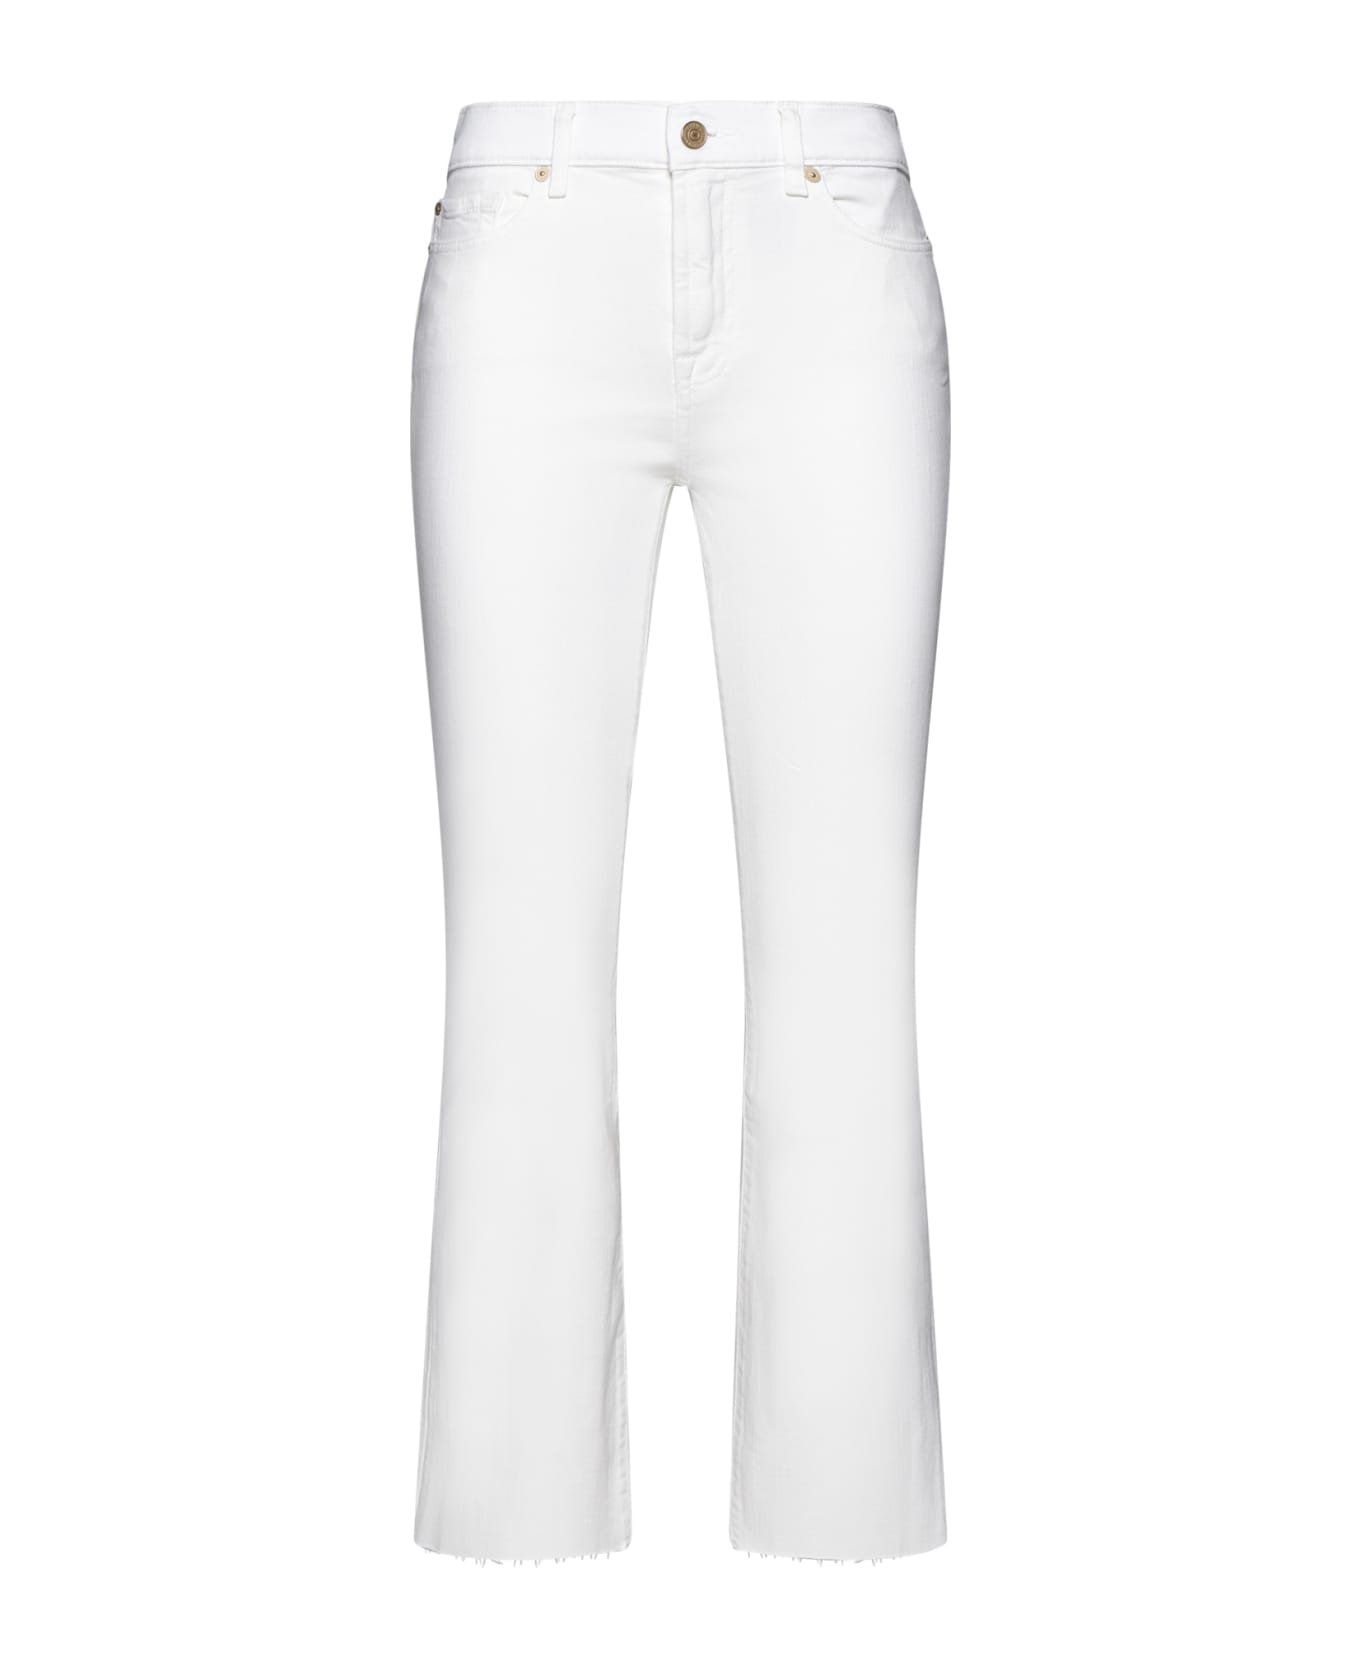 7 For All Mankind Jeans - White デニム